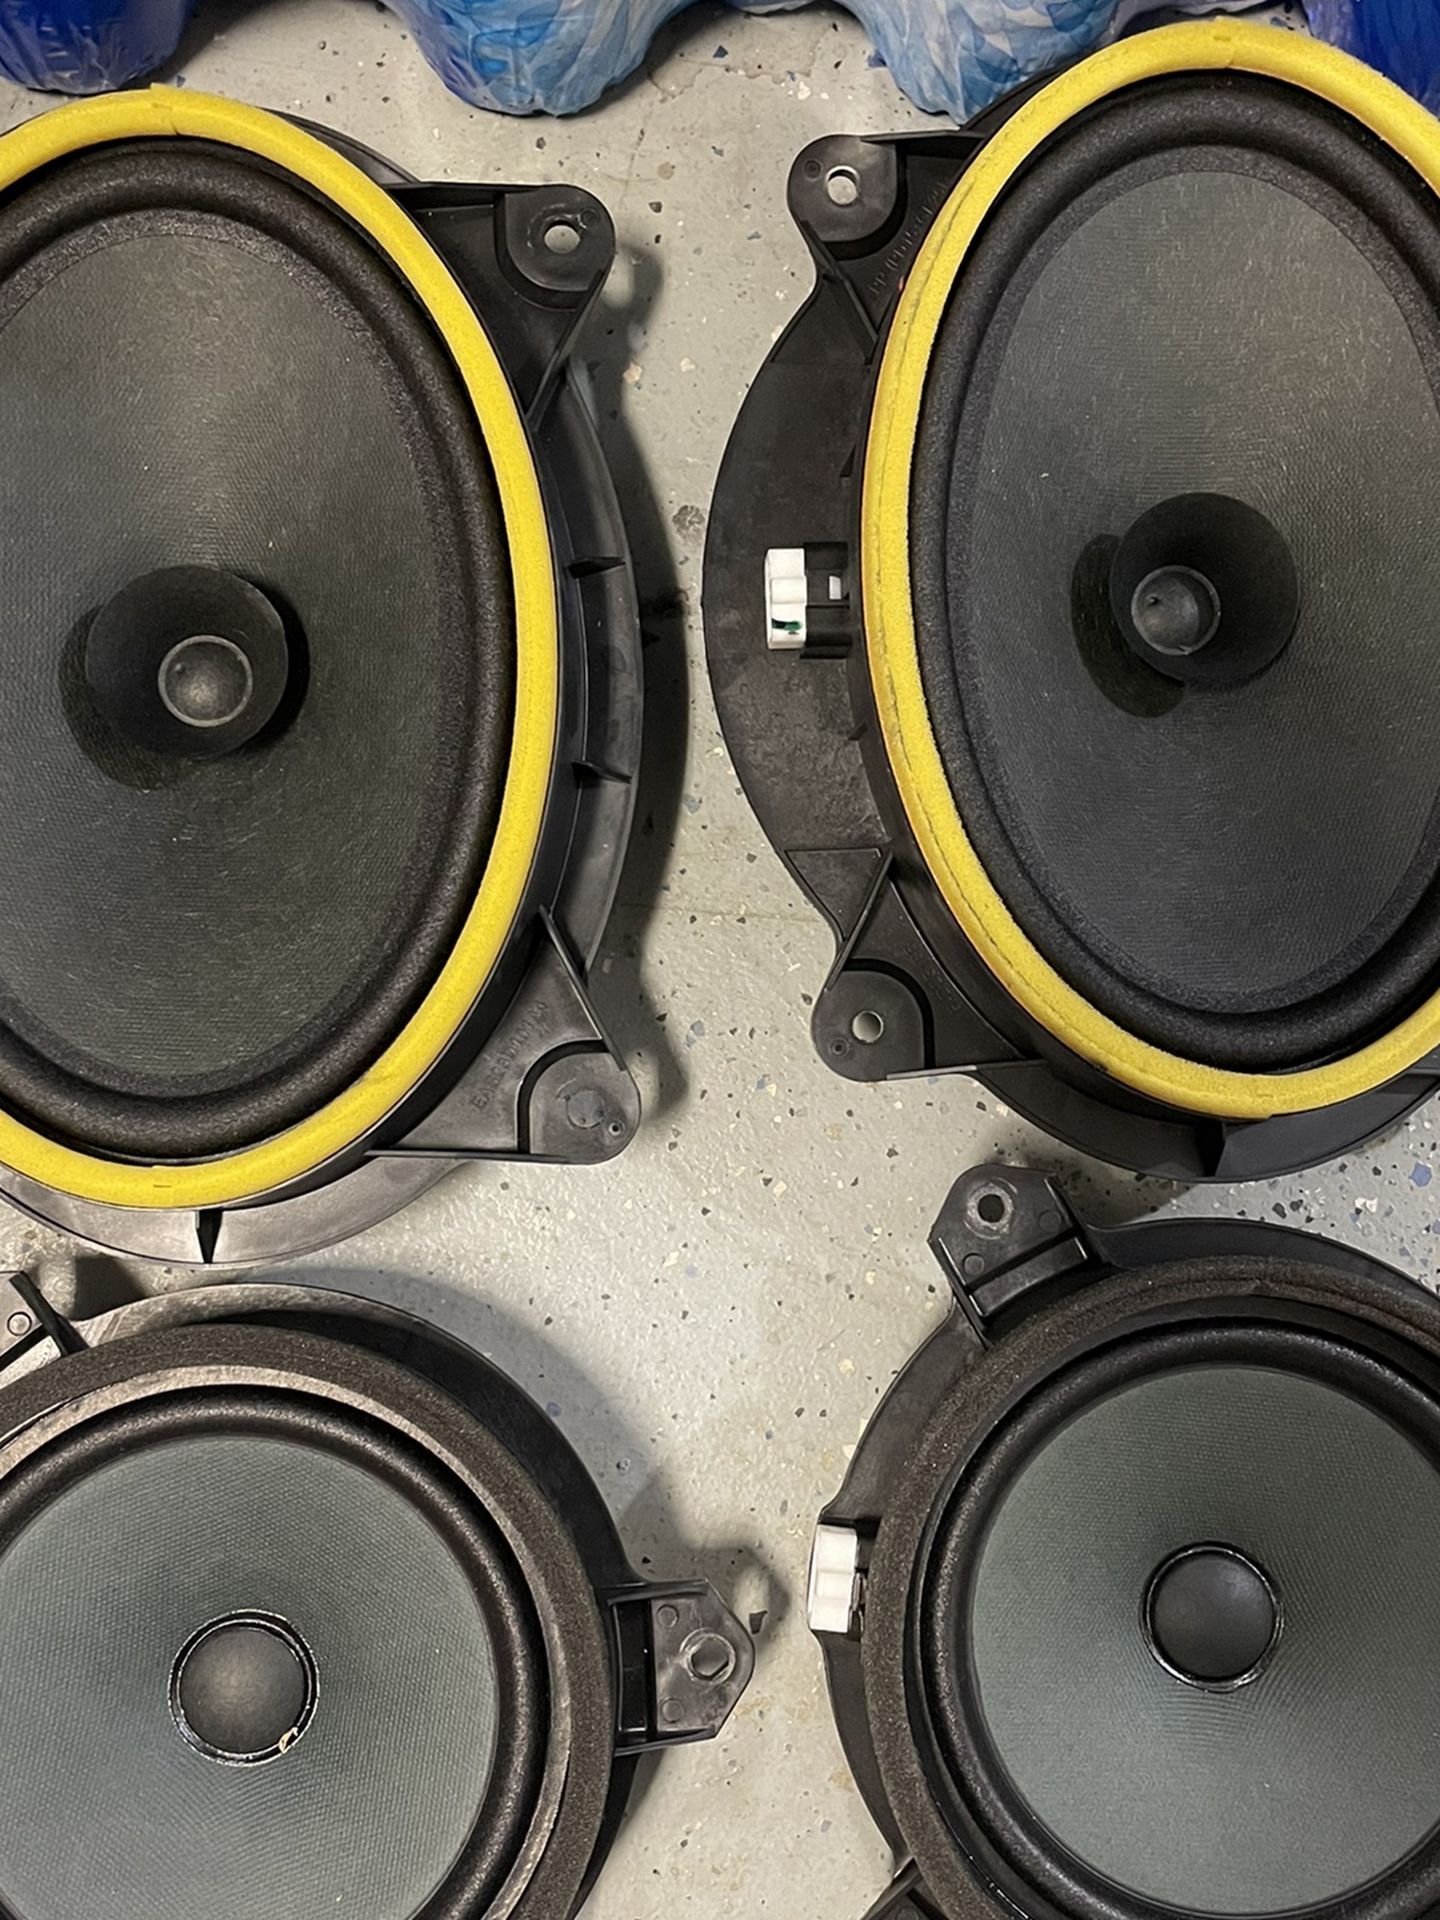 2016 AND UP STOCK TOYOTA TACOMA SPEAKERS